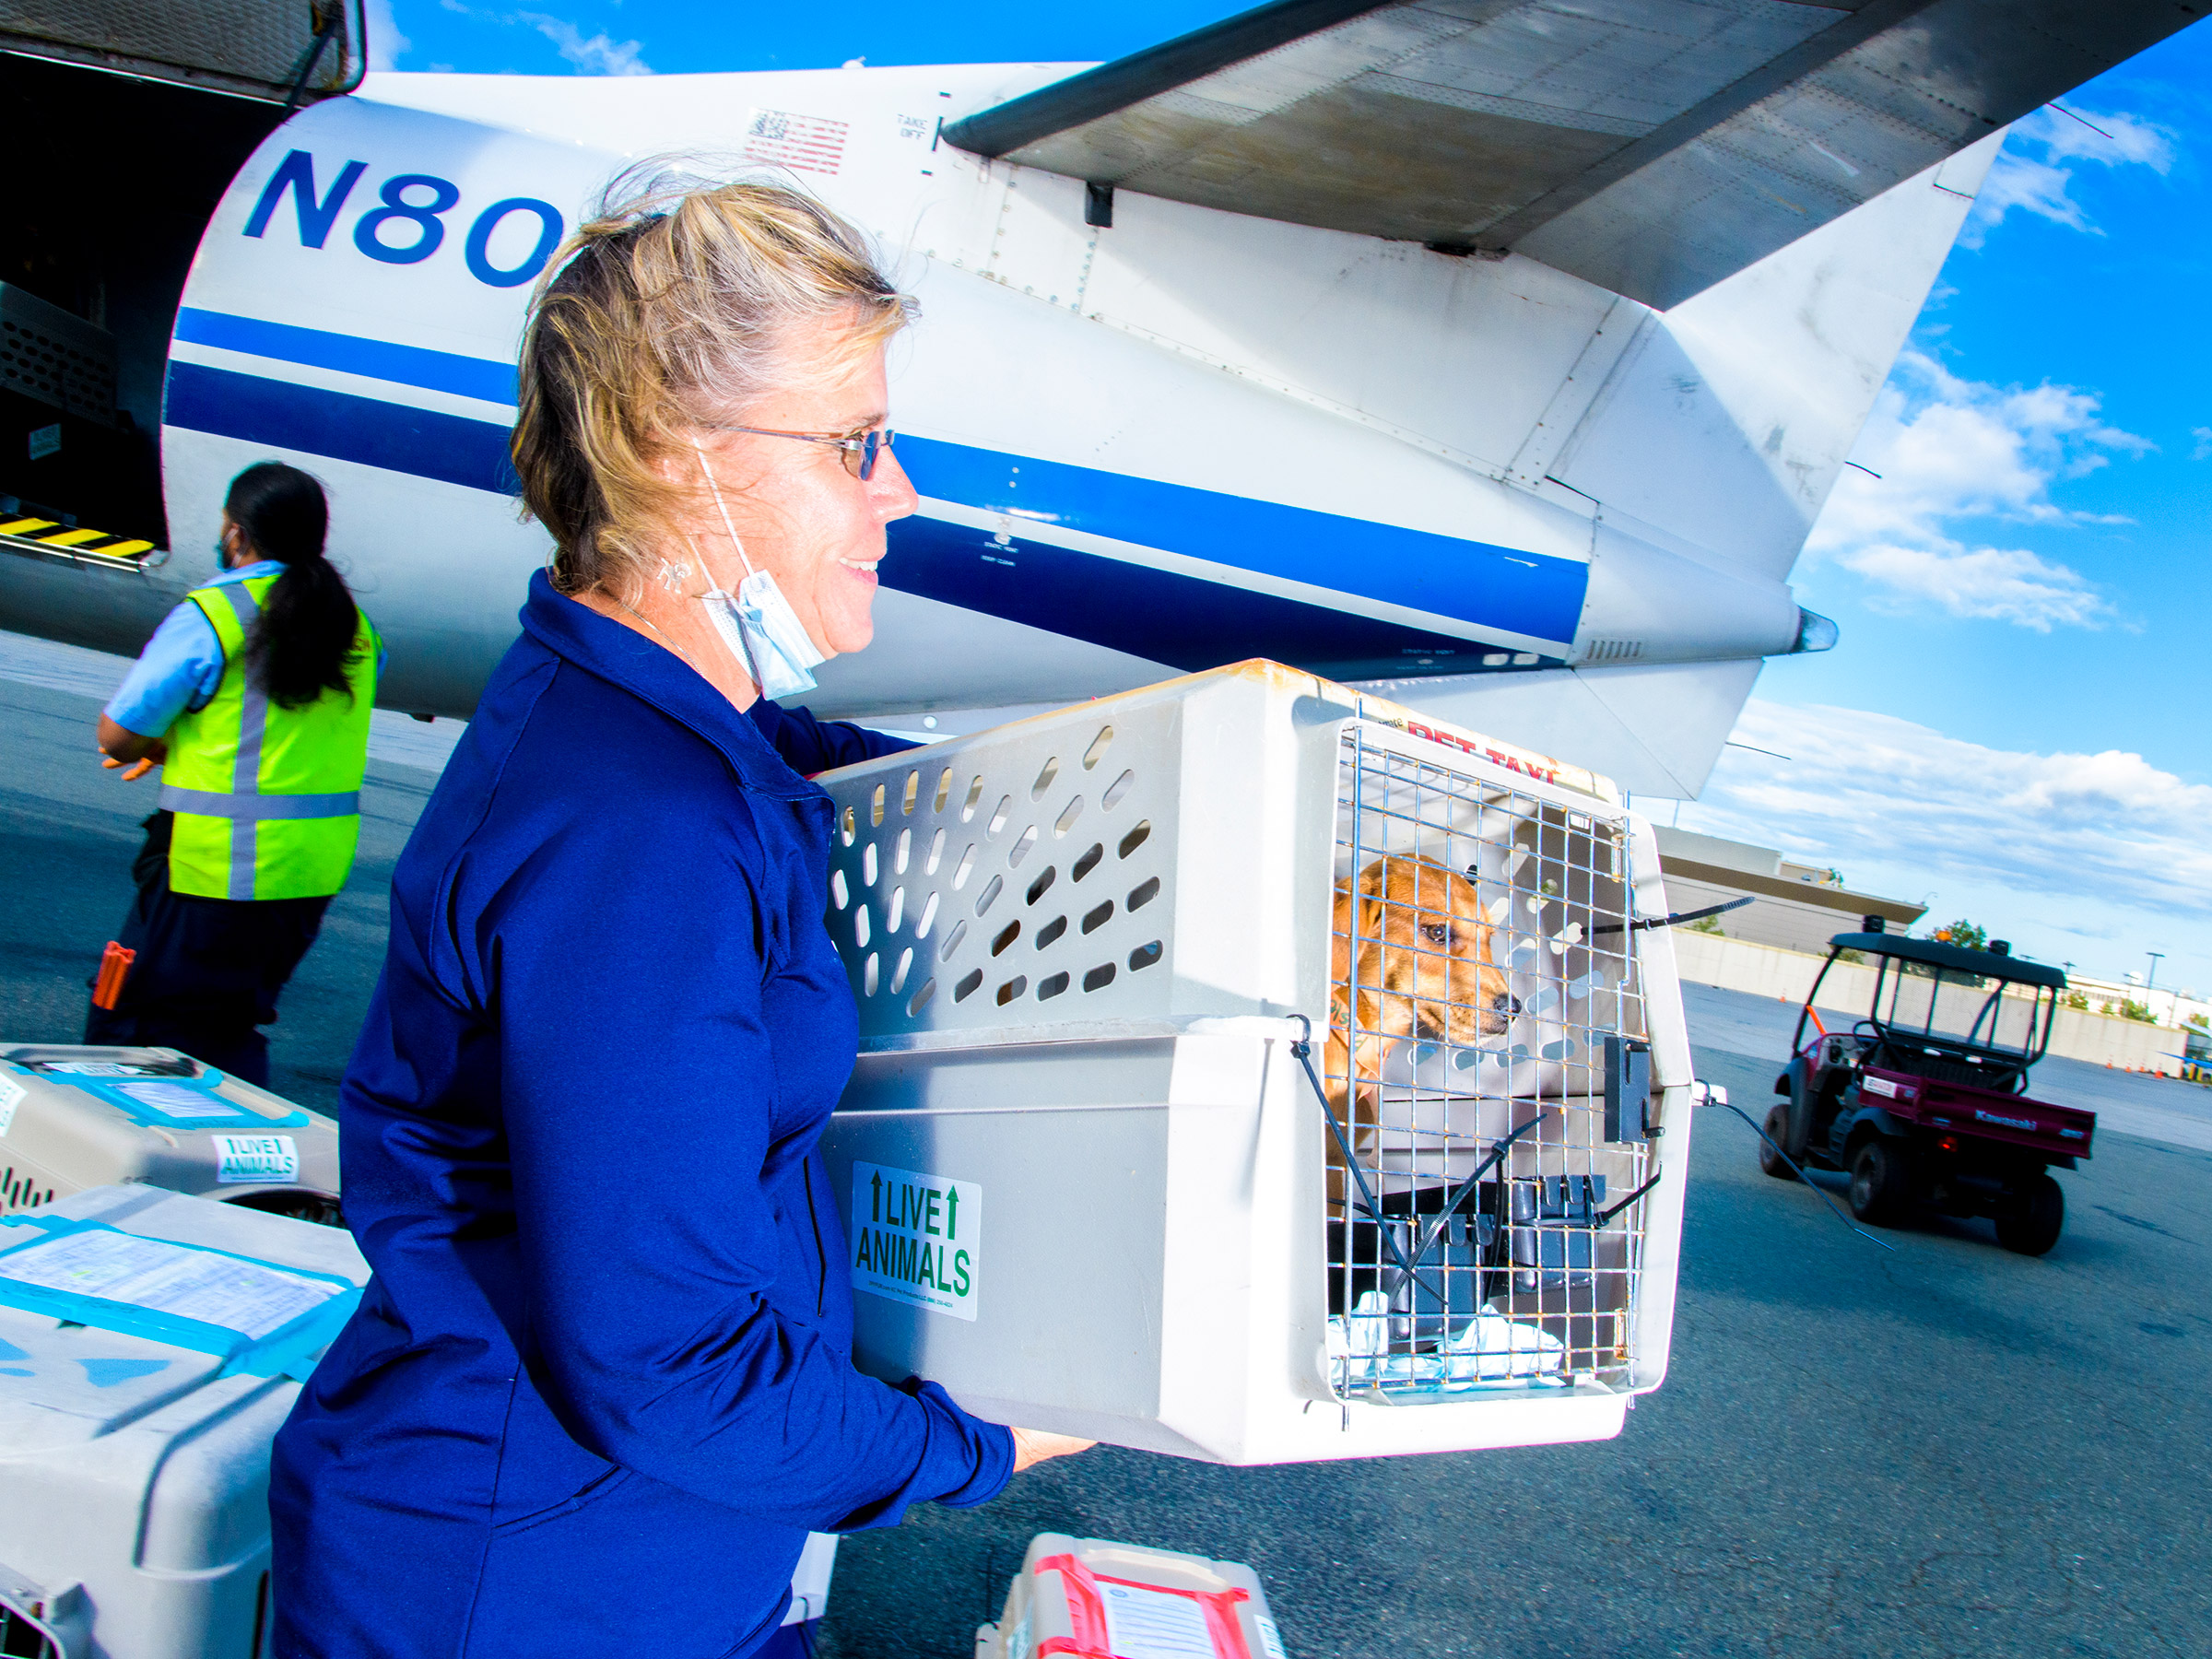 Sheryl Blancato of Second Chance Animal Services carries <a href="https://time.com/6144366/dog-adoption-relocation-aspca/">2-month-old Presley</a>, who just flew from Mississippi to Massachusetts, on Sept. 10, 2021. Presley was one of the millions of dogs whose lives were saved by being relocated last year. (Evan Angelastro for TIME)